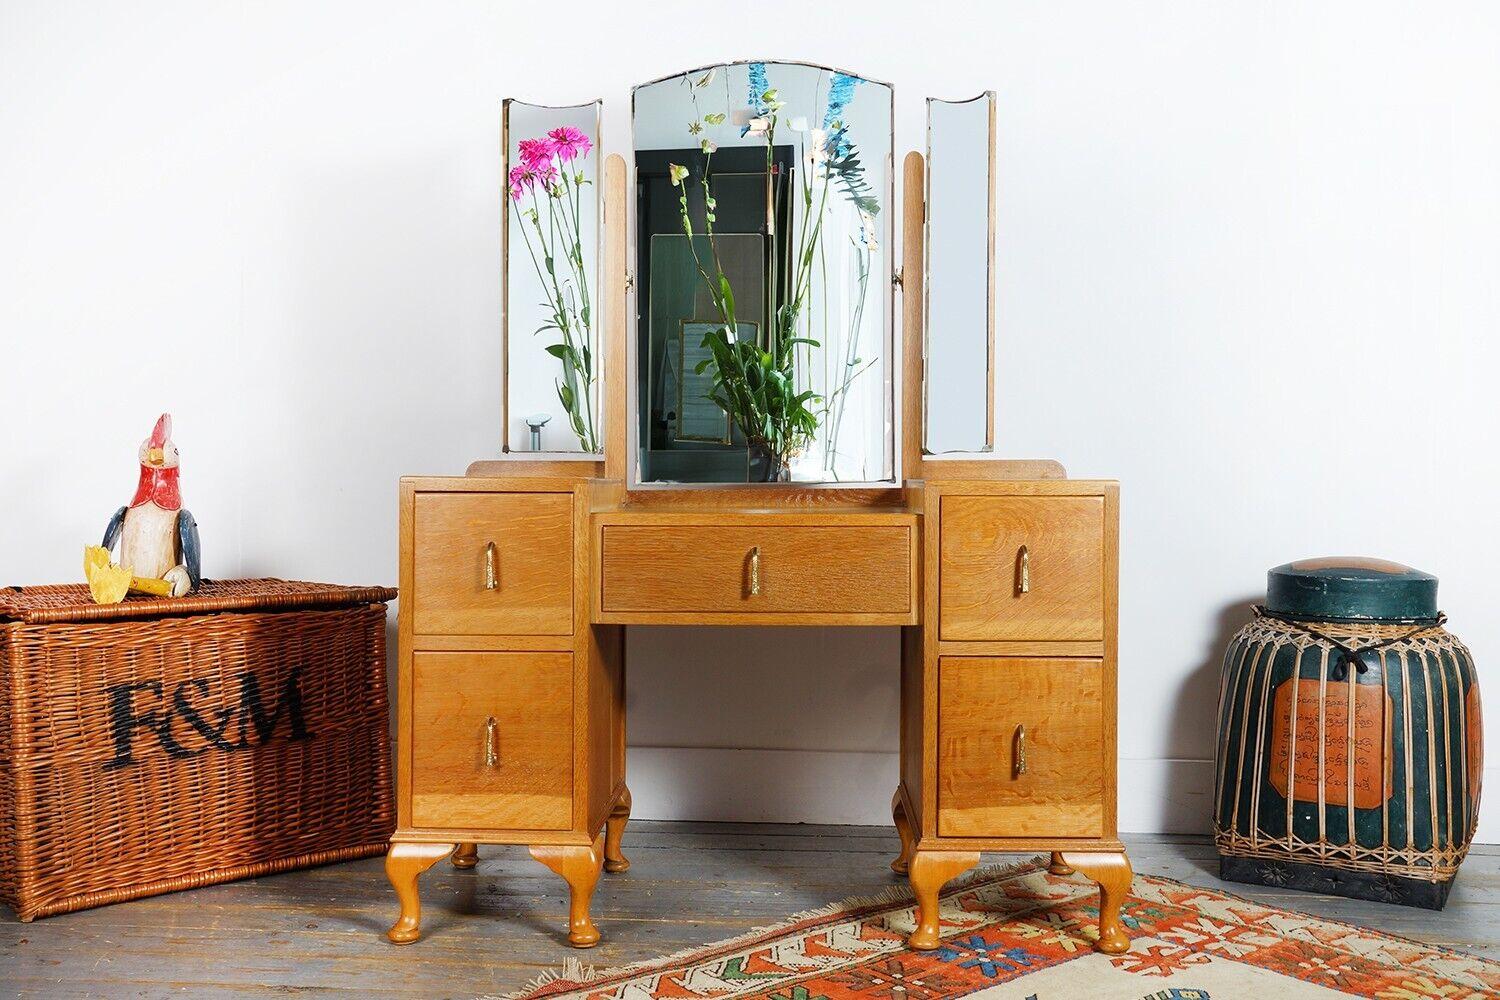 Art Deco Dressing Table

1930s oak mirrored dressing table sat on cabriole legs. Features five drawers and three adjustable mirrors.

Art Deco is a prominent and influential design style that emerged in the early 20th century, reaching its peak